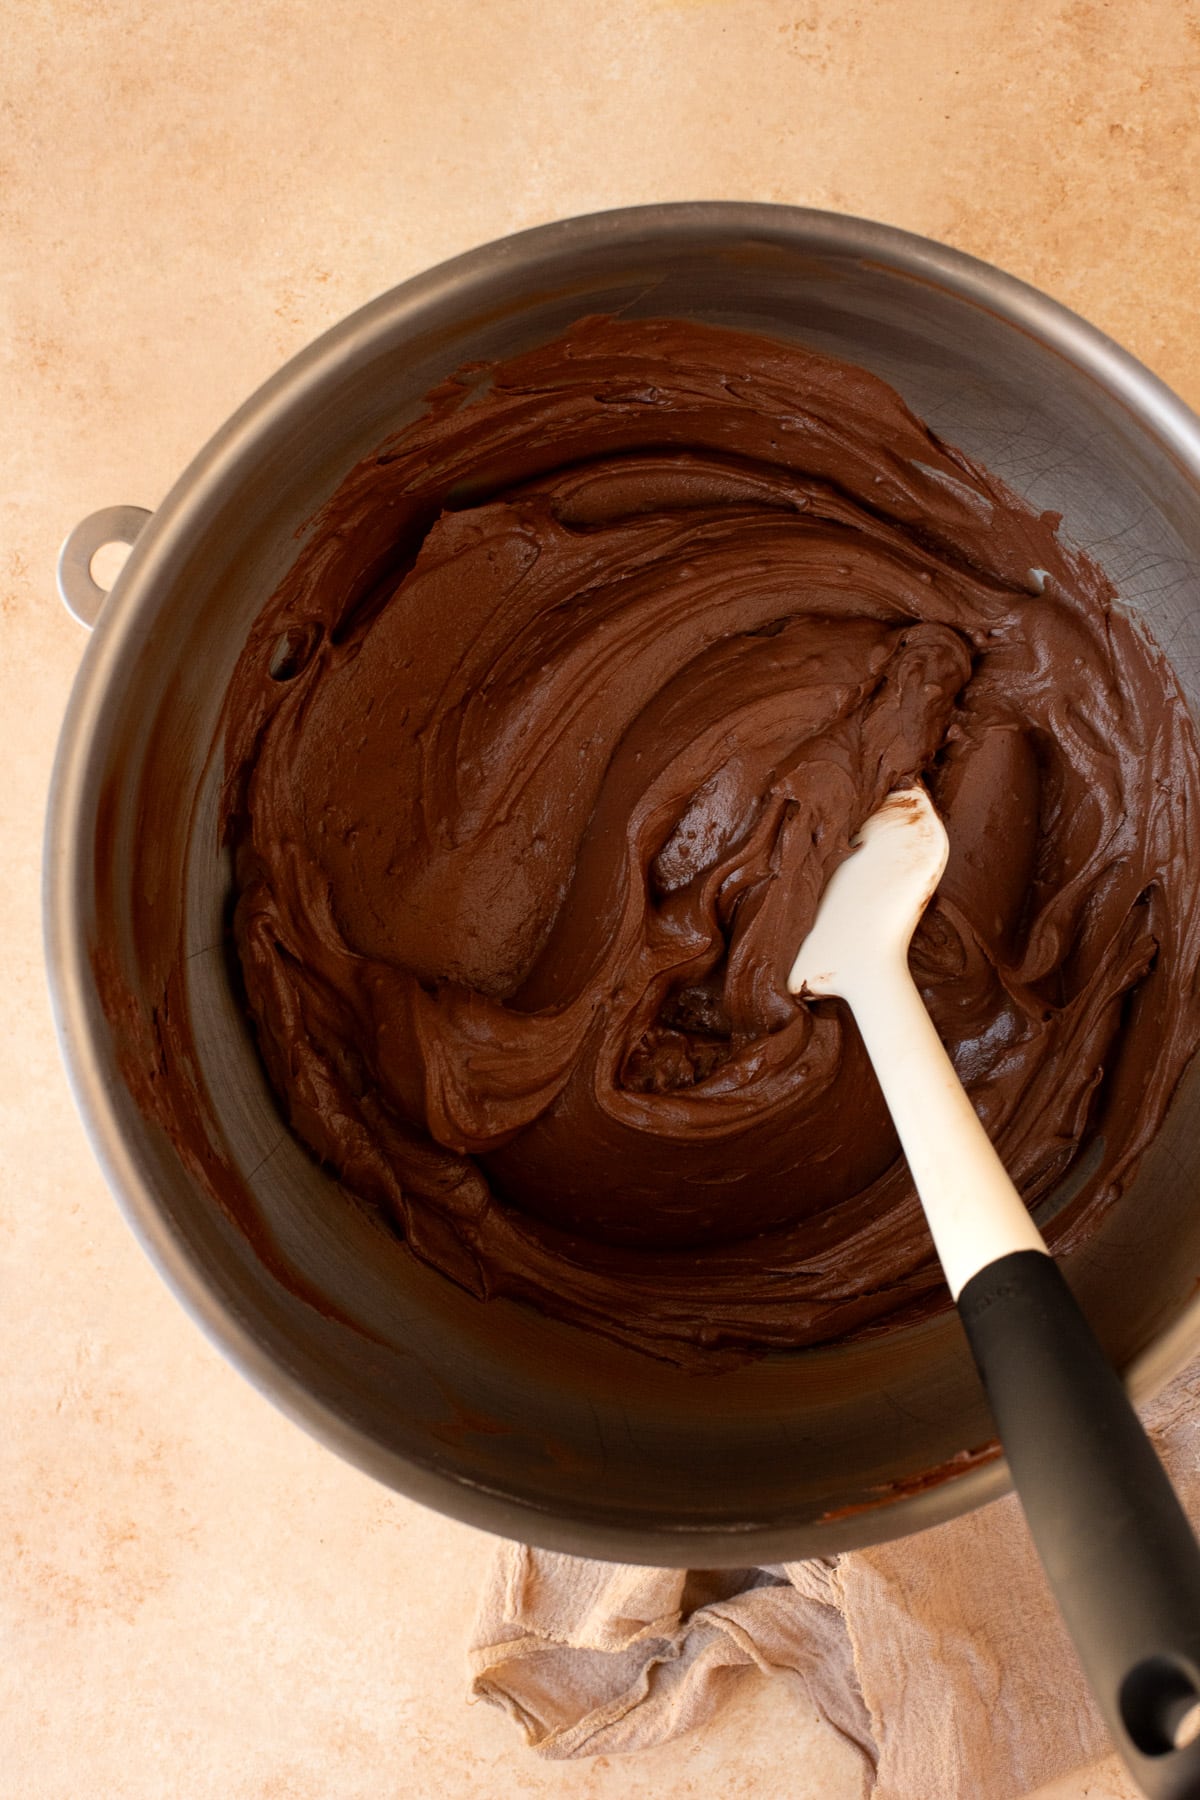 Chocolate frosting mixed together in a large metal bowl with a rubber spatula.